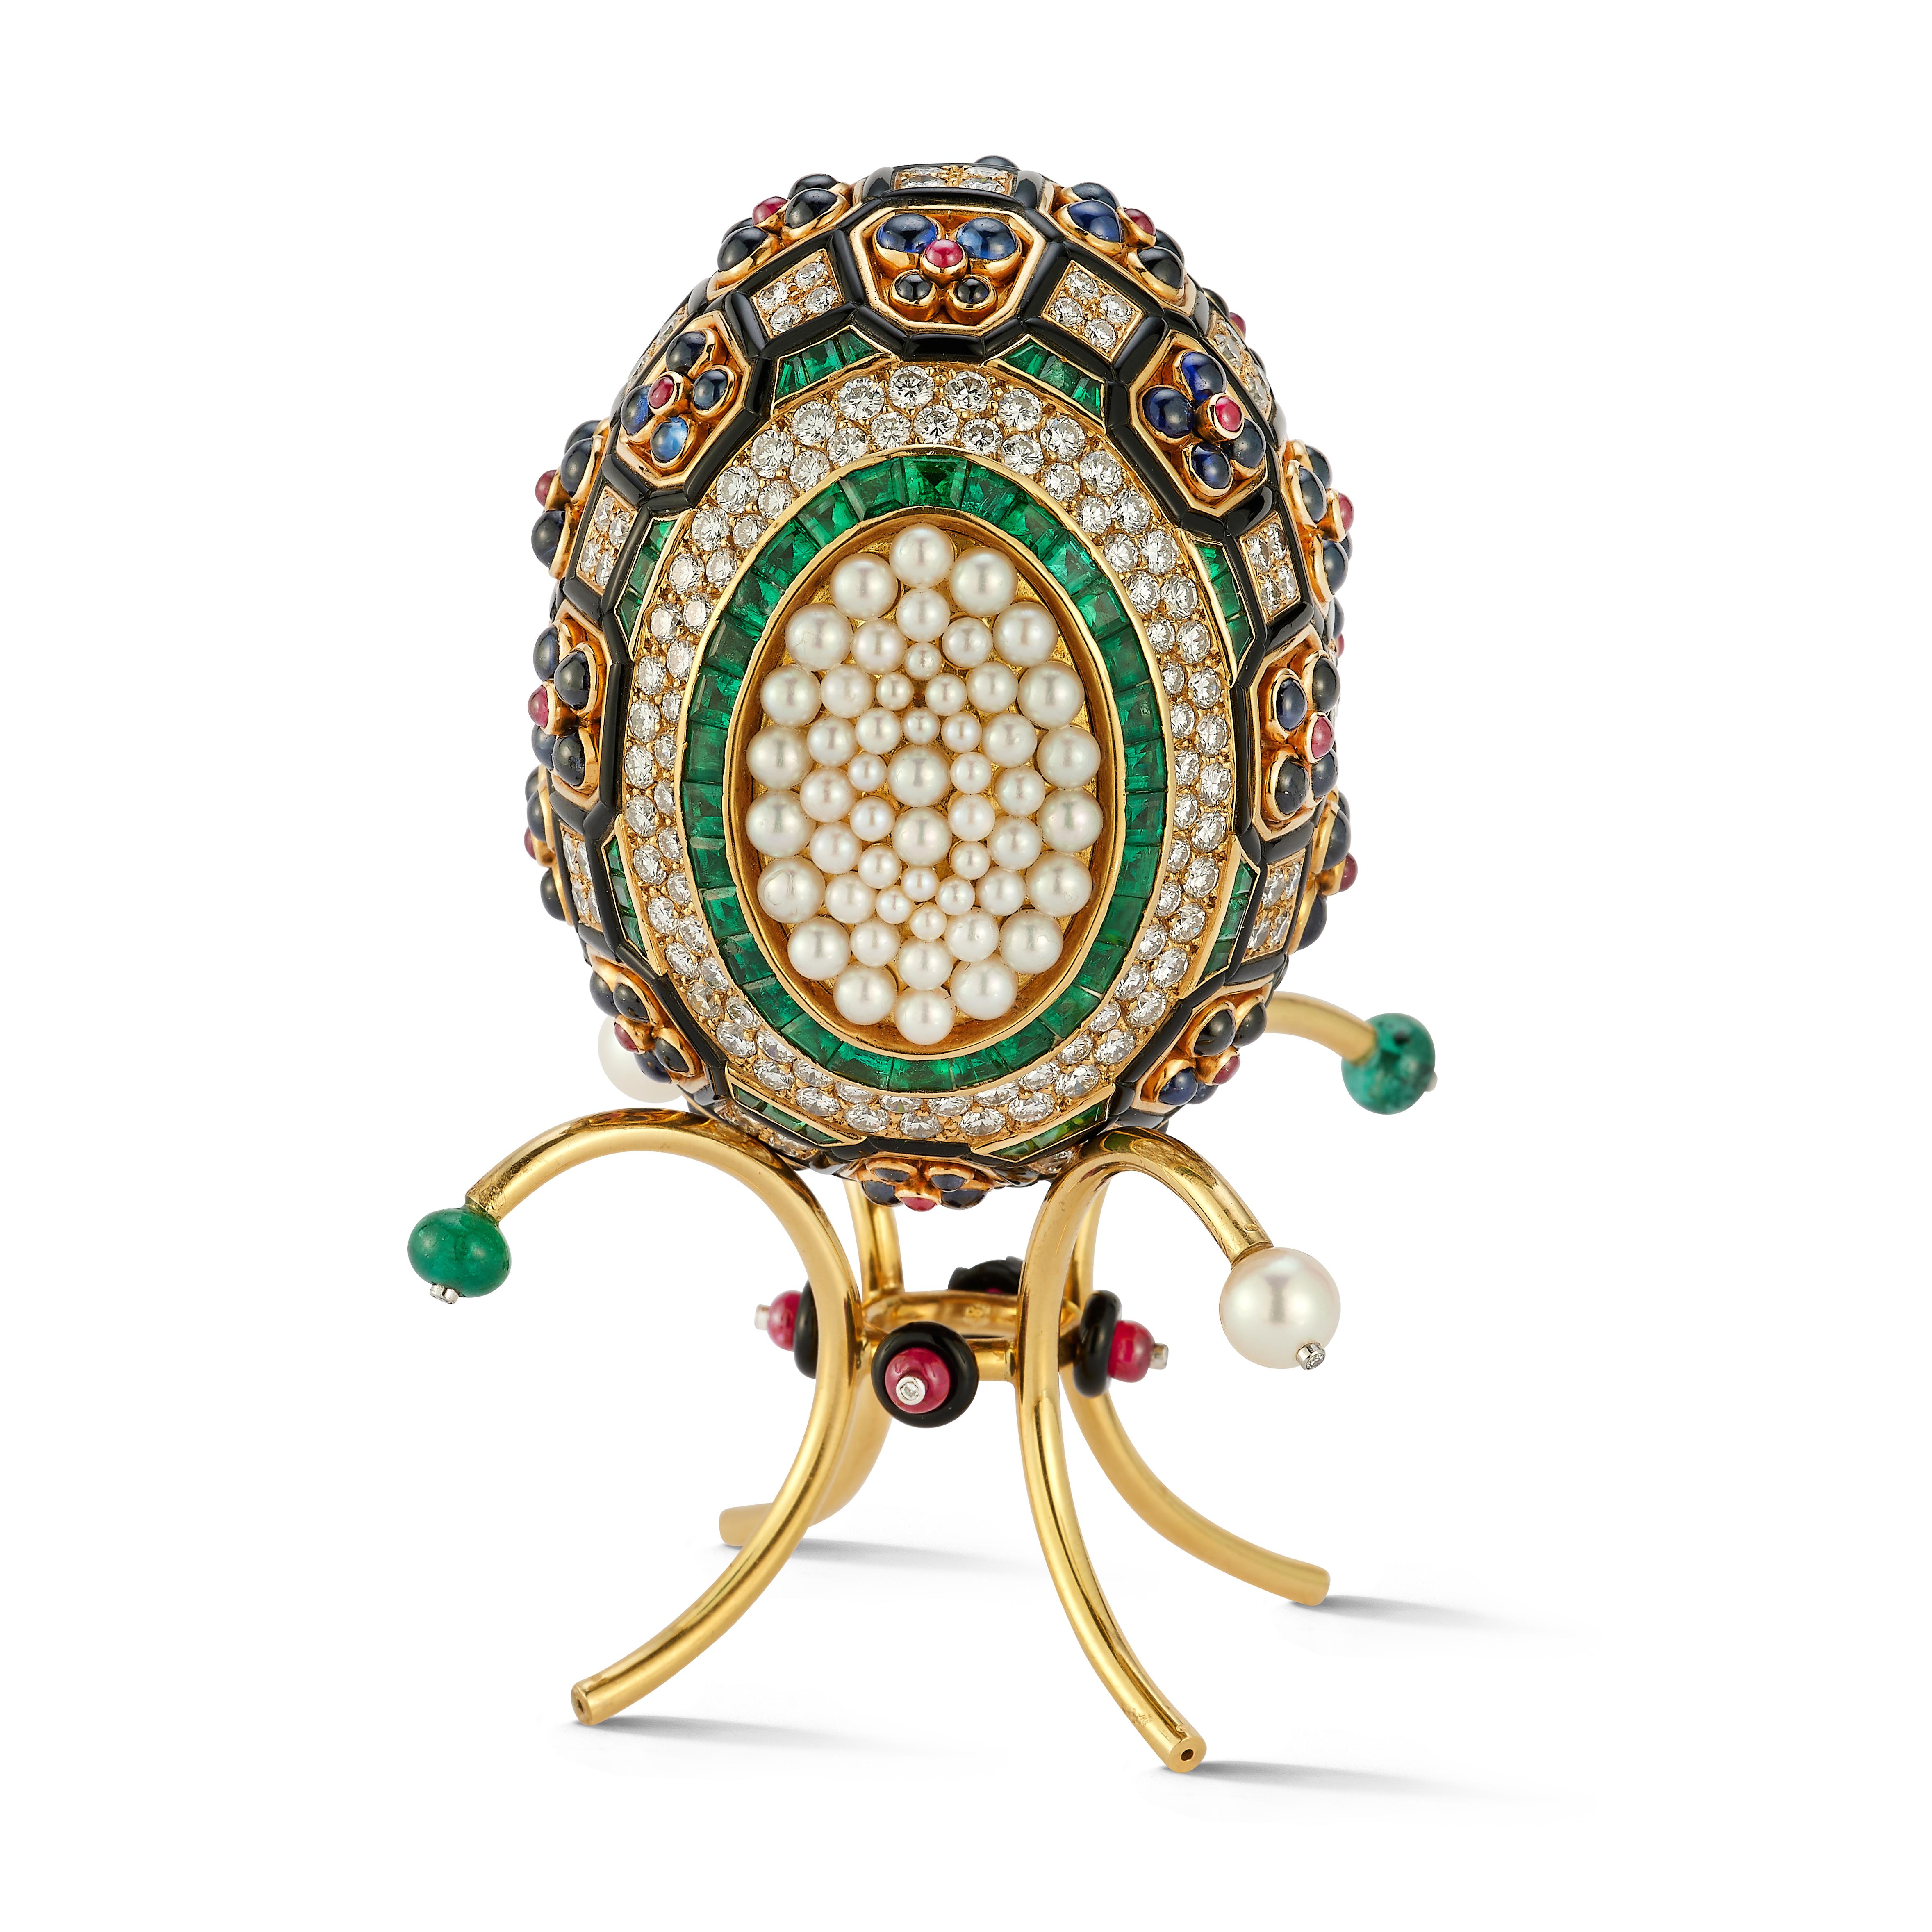 Asprey Jeweled Egg

An incredible multi gem desk object set with diamonds, rubies, emeralds, sapphires, onyx and pearls. Includes a stand made with 18K Gold. 

Signed: Asprey

Egg Measures at approximately 2.5